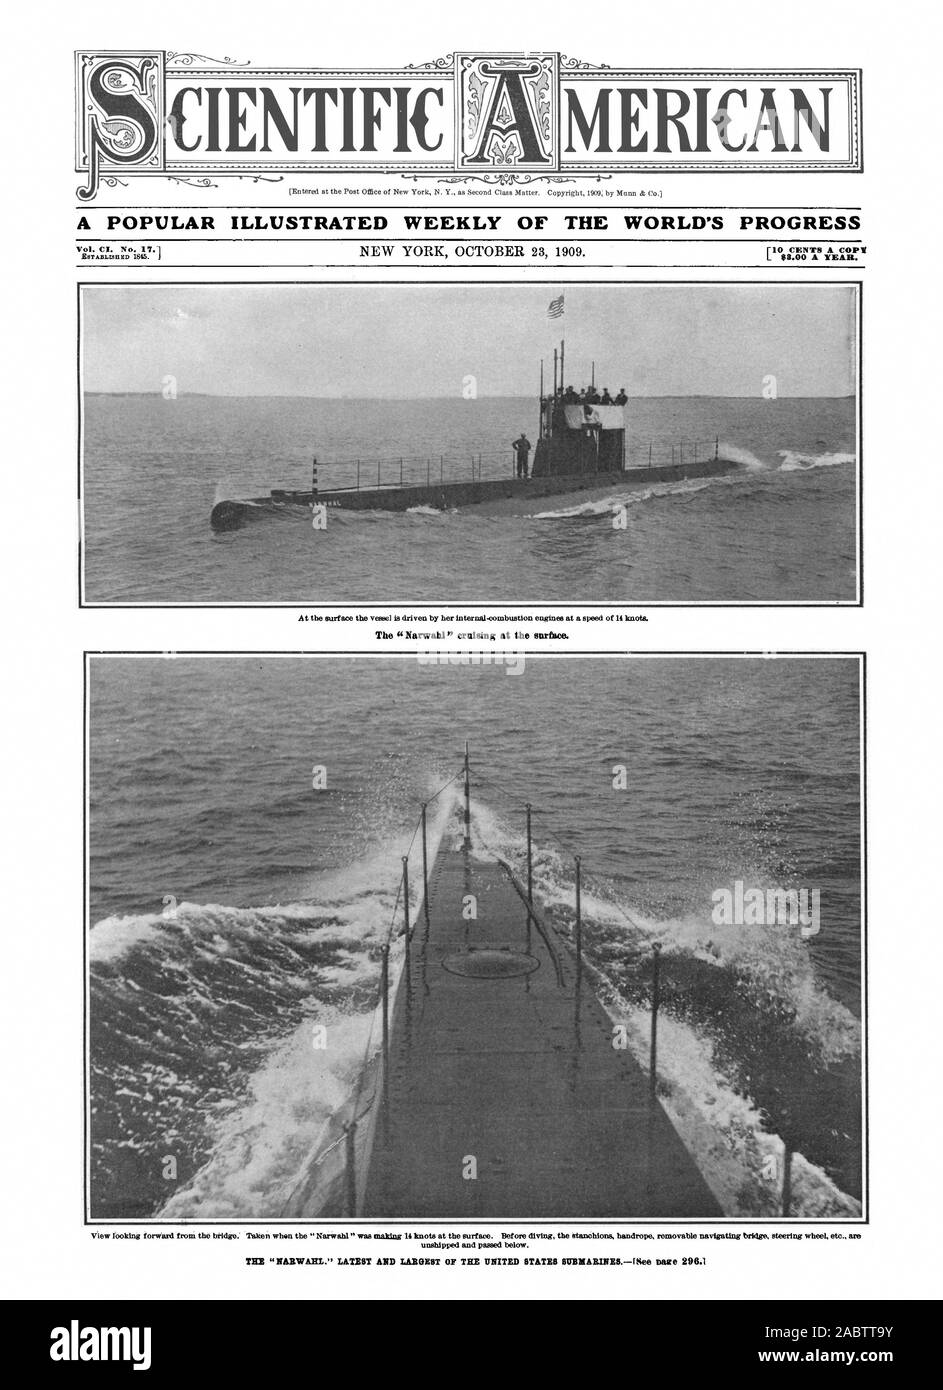 CIENTIFIC MERICAN The ' Narwahl' cruising at the surface. A POPULAR ILLUSTRATED WEEKLY OF THE WORLD'S PROGRESS, scientific american, -1909-10-23, submarine Stock Photo